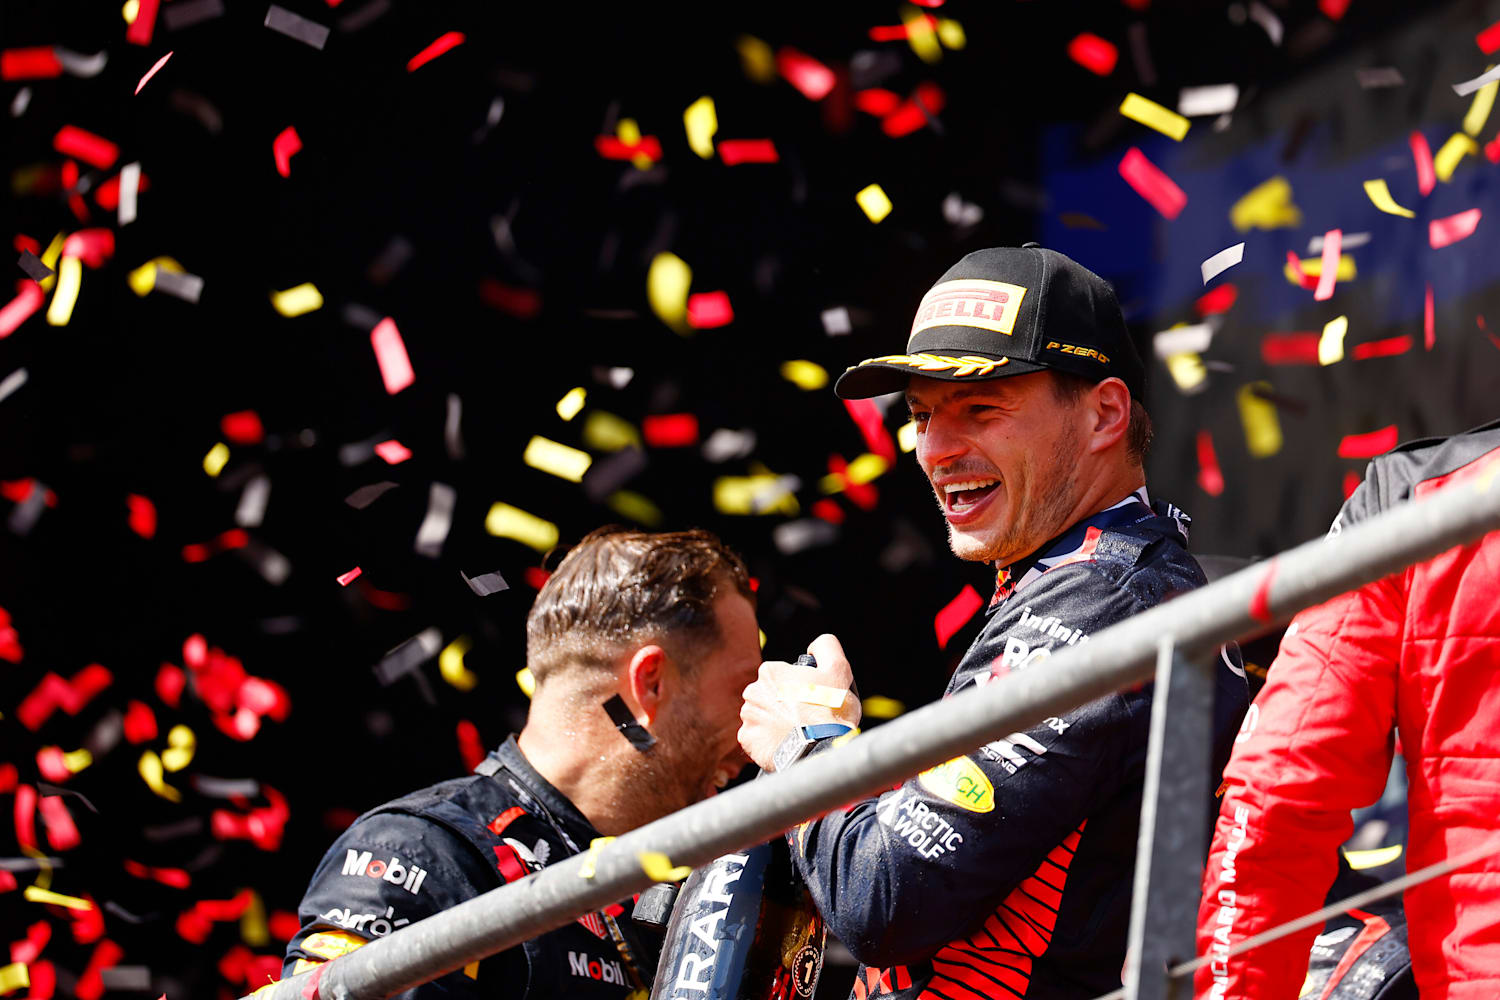 Jos Verstappen: An insanely good result for Max in Miami!